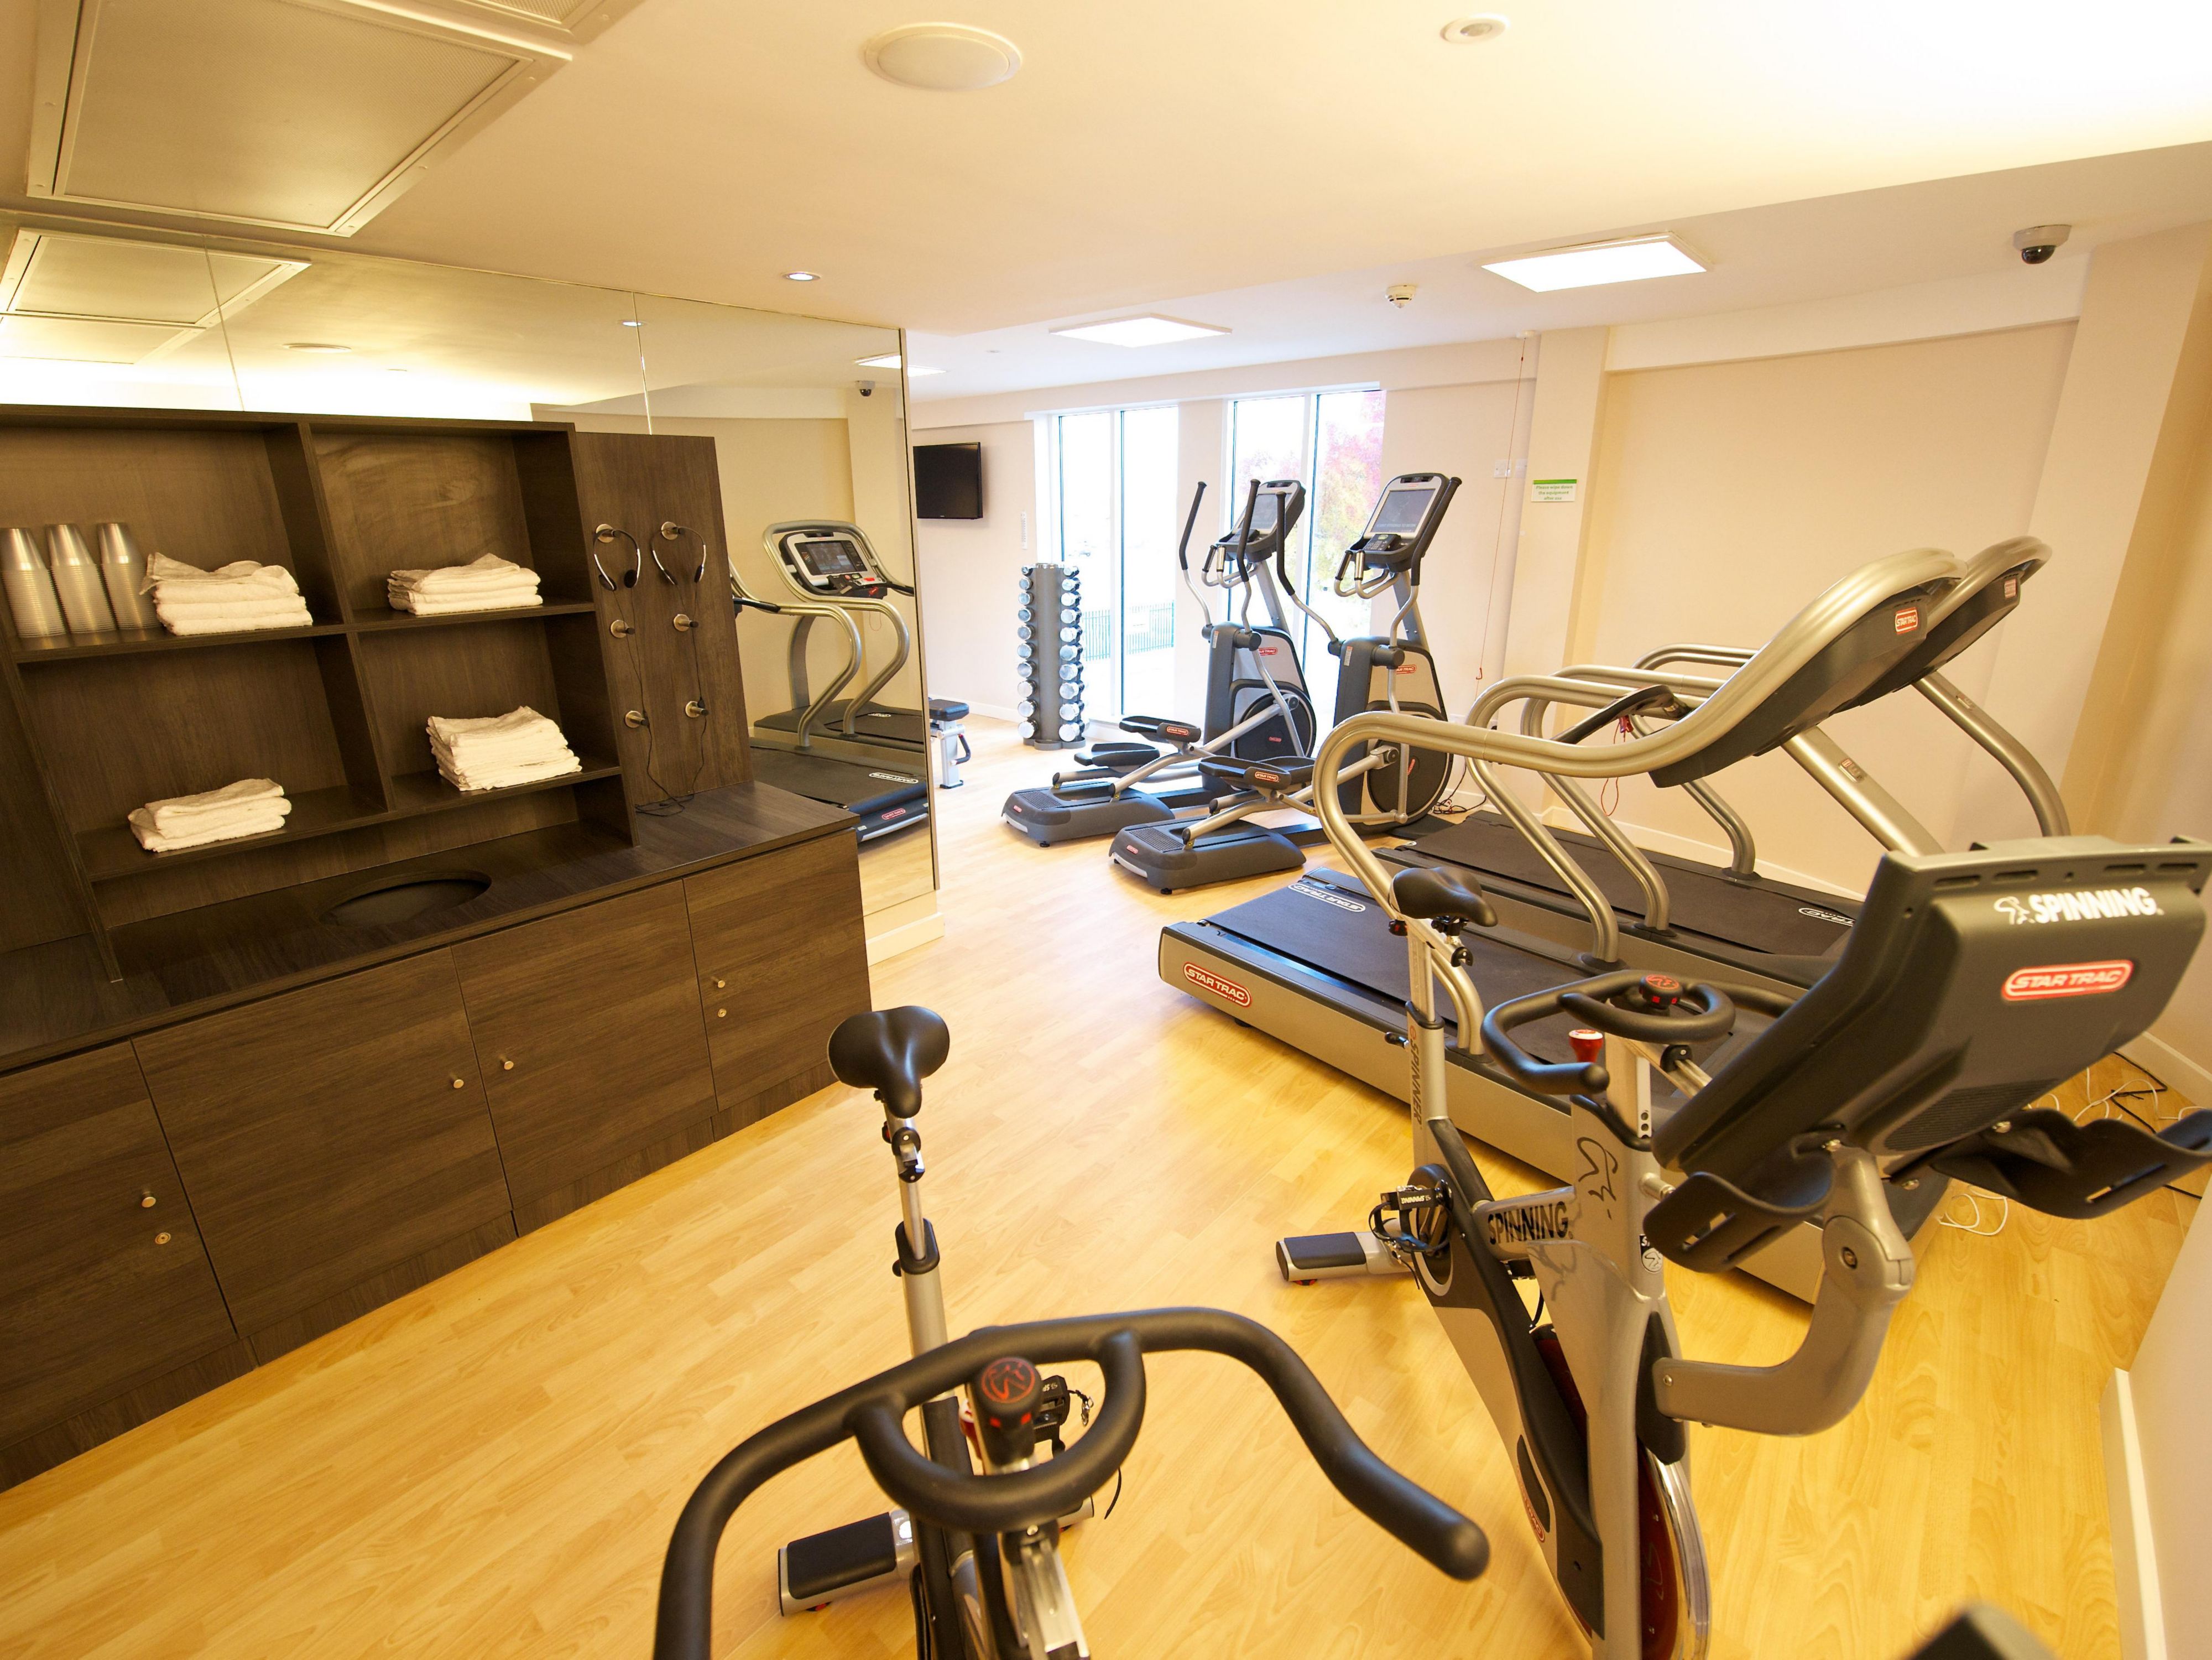 Here at Holiday Inn Southend, we have a fitness suite complete with a range of cardiovascular and resistance equipment.